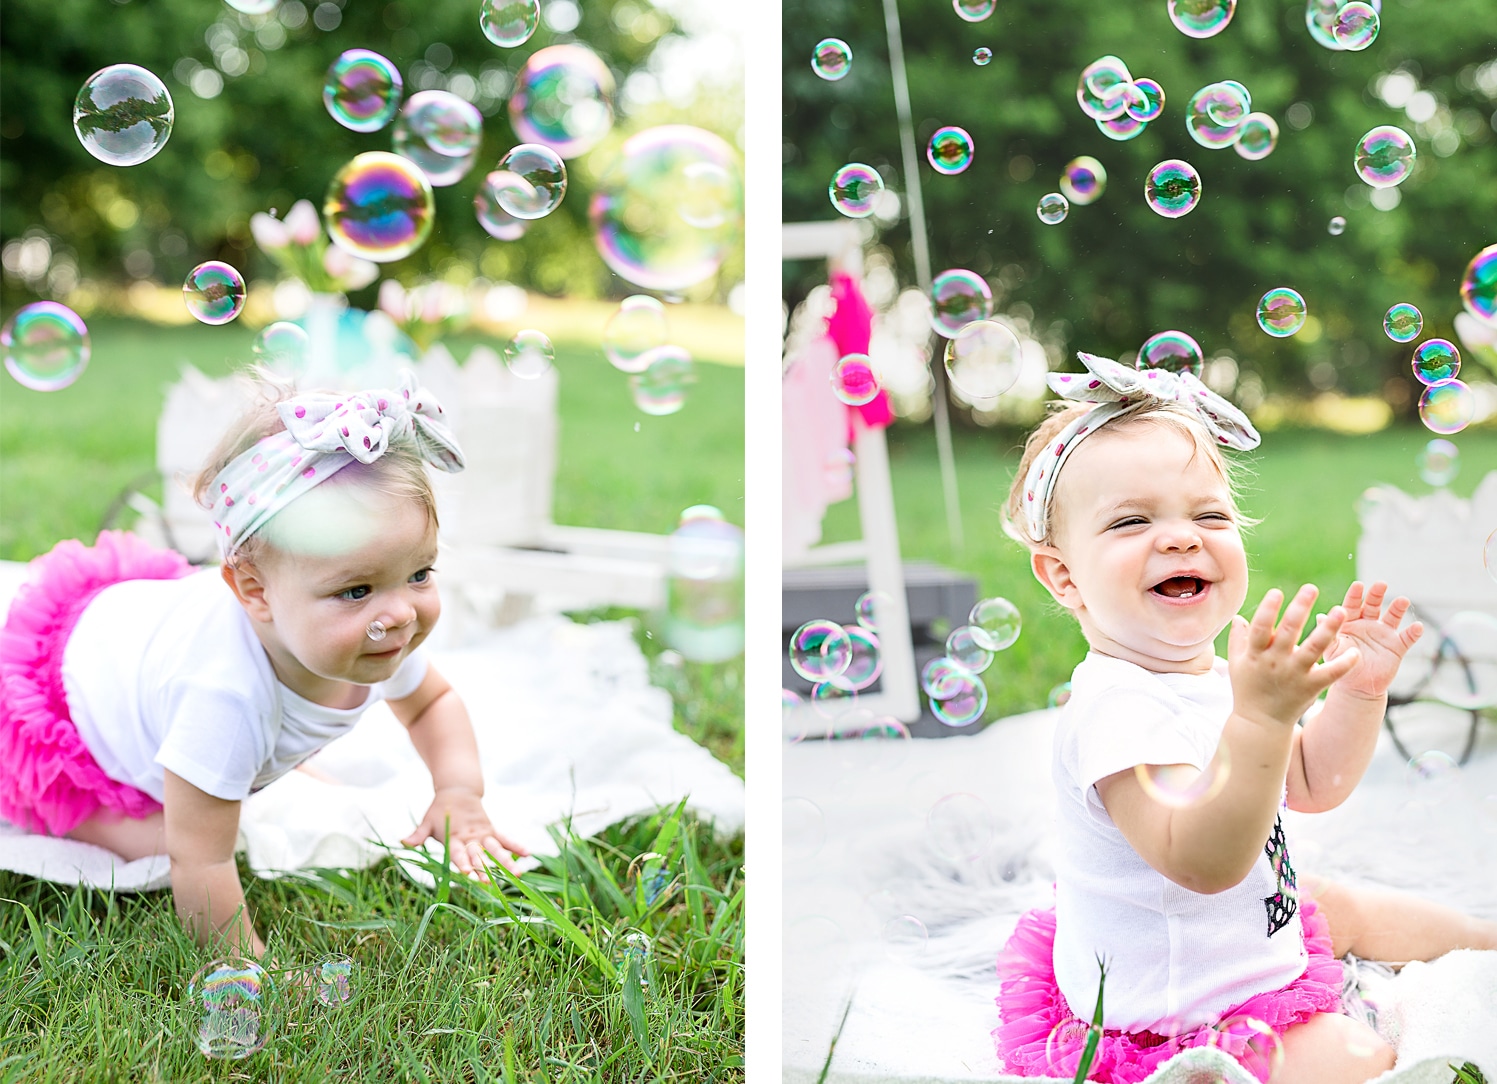 A baby girl giggles with delight as she reaches out to pop bubbles floating in the air